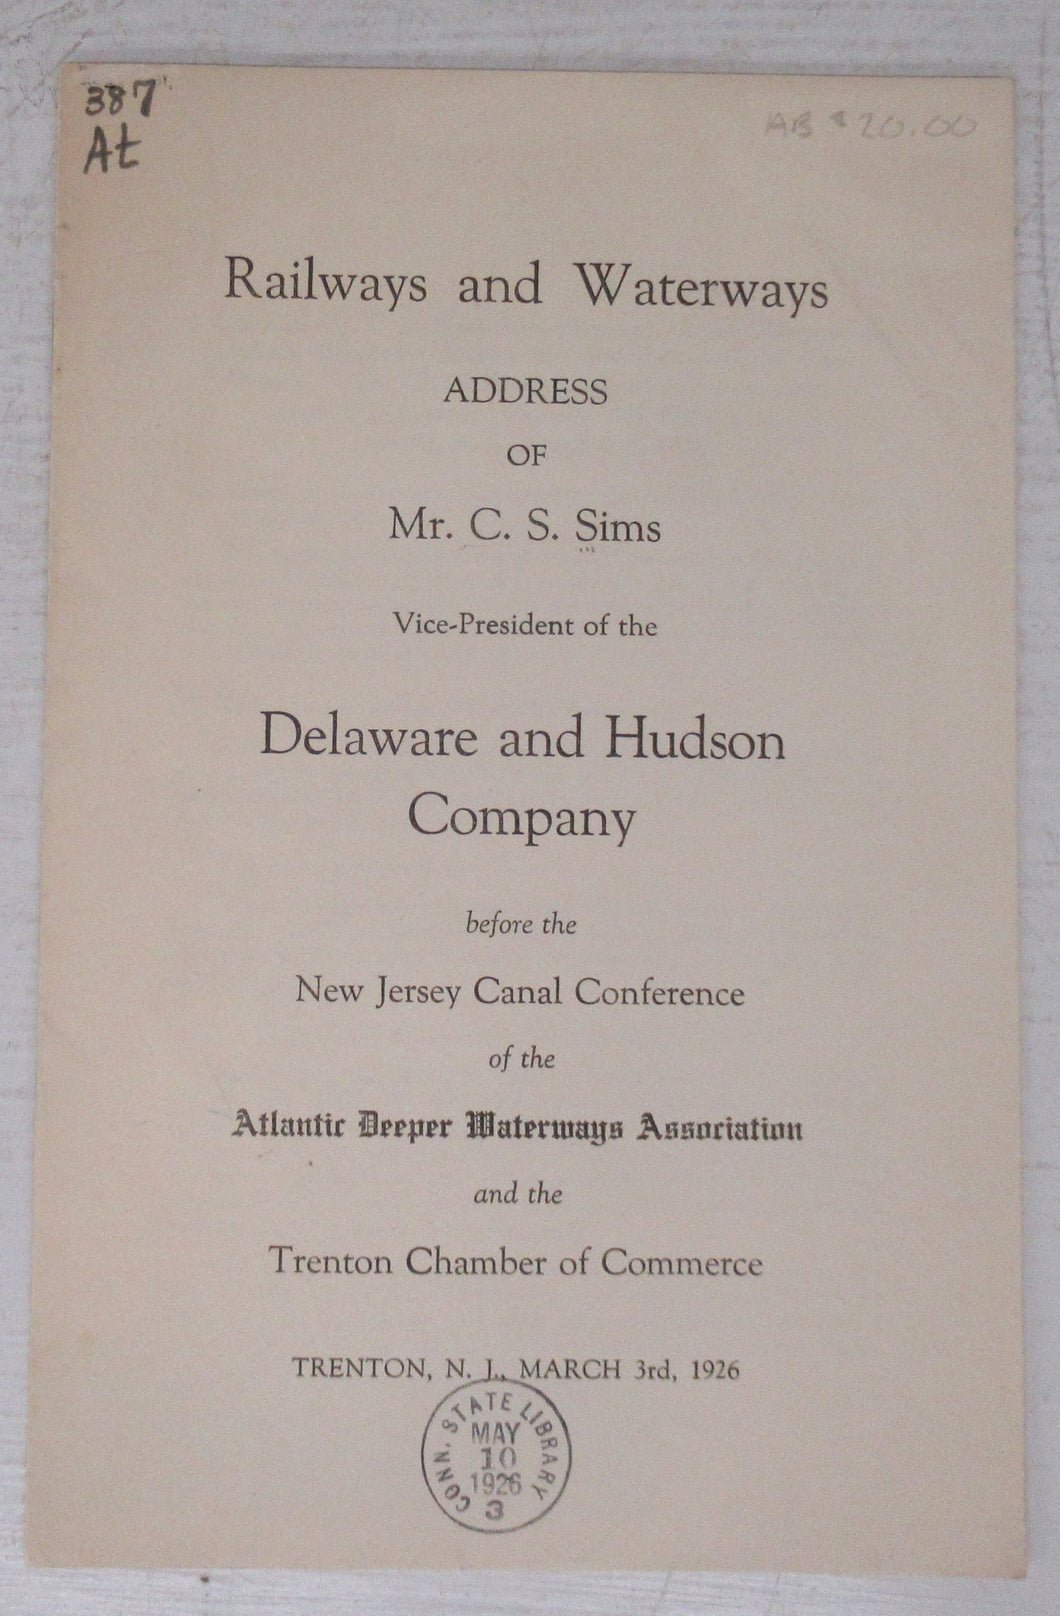 Railways and Waterways: Address of Mr. C. S. Sims, Vice-President of the Delaware and Hudson Company, before the New Jersey Canal Conference of the Atlantic Deeper Waterways Association and the Trenton Chamber of Commerce, Trenton, N.J., March 3rd, 1926